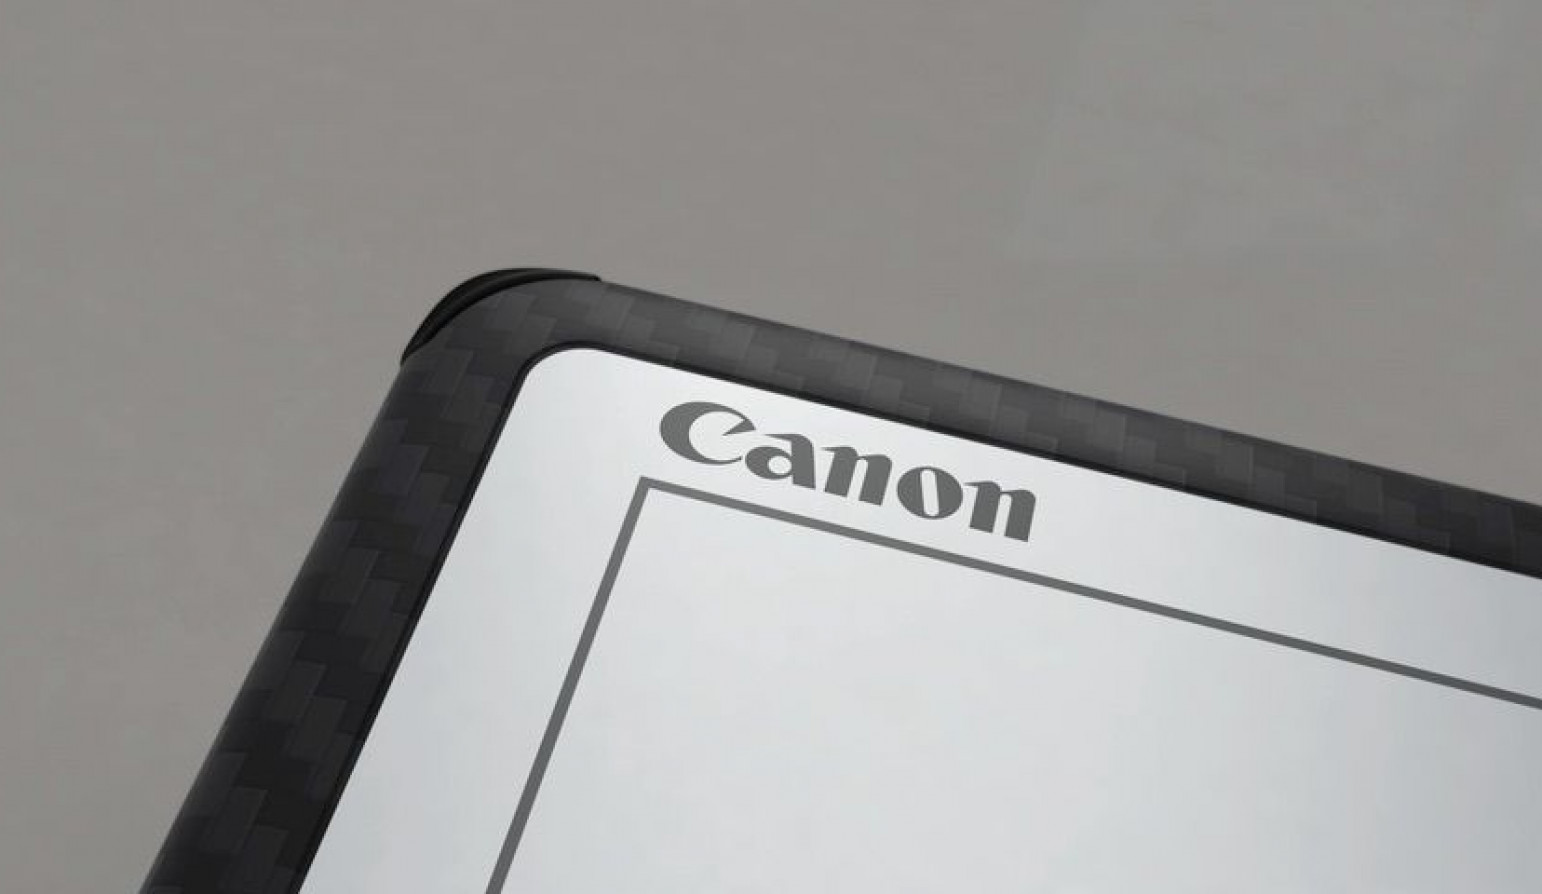 Next generation wireless detectors from Canon